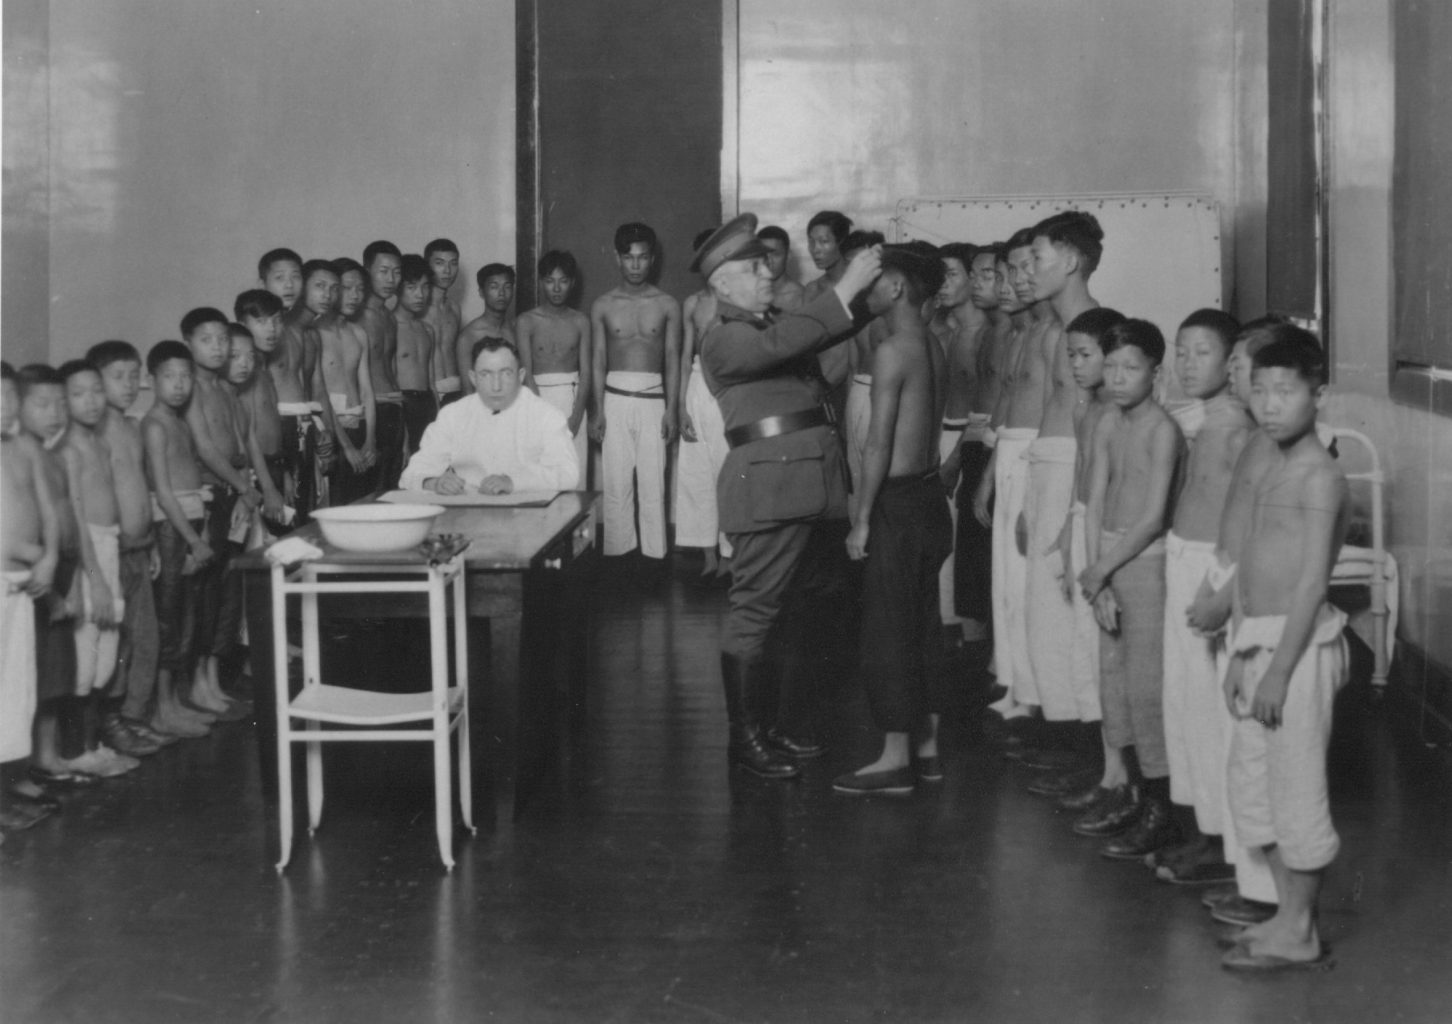 A group of Asian children and teenagers standing against the wall in a room with a white doctor and uniformed official, who is inspecting the head of one of the boys.